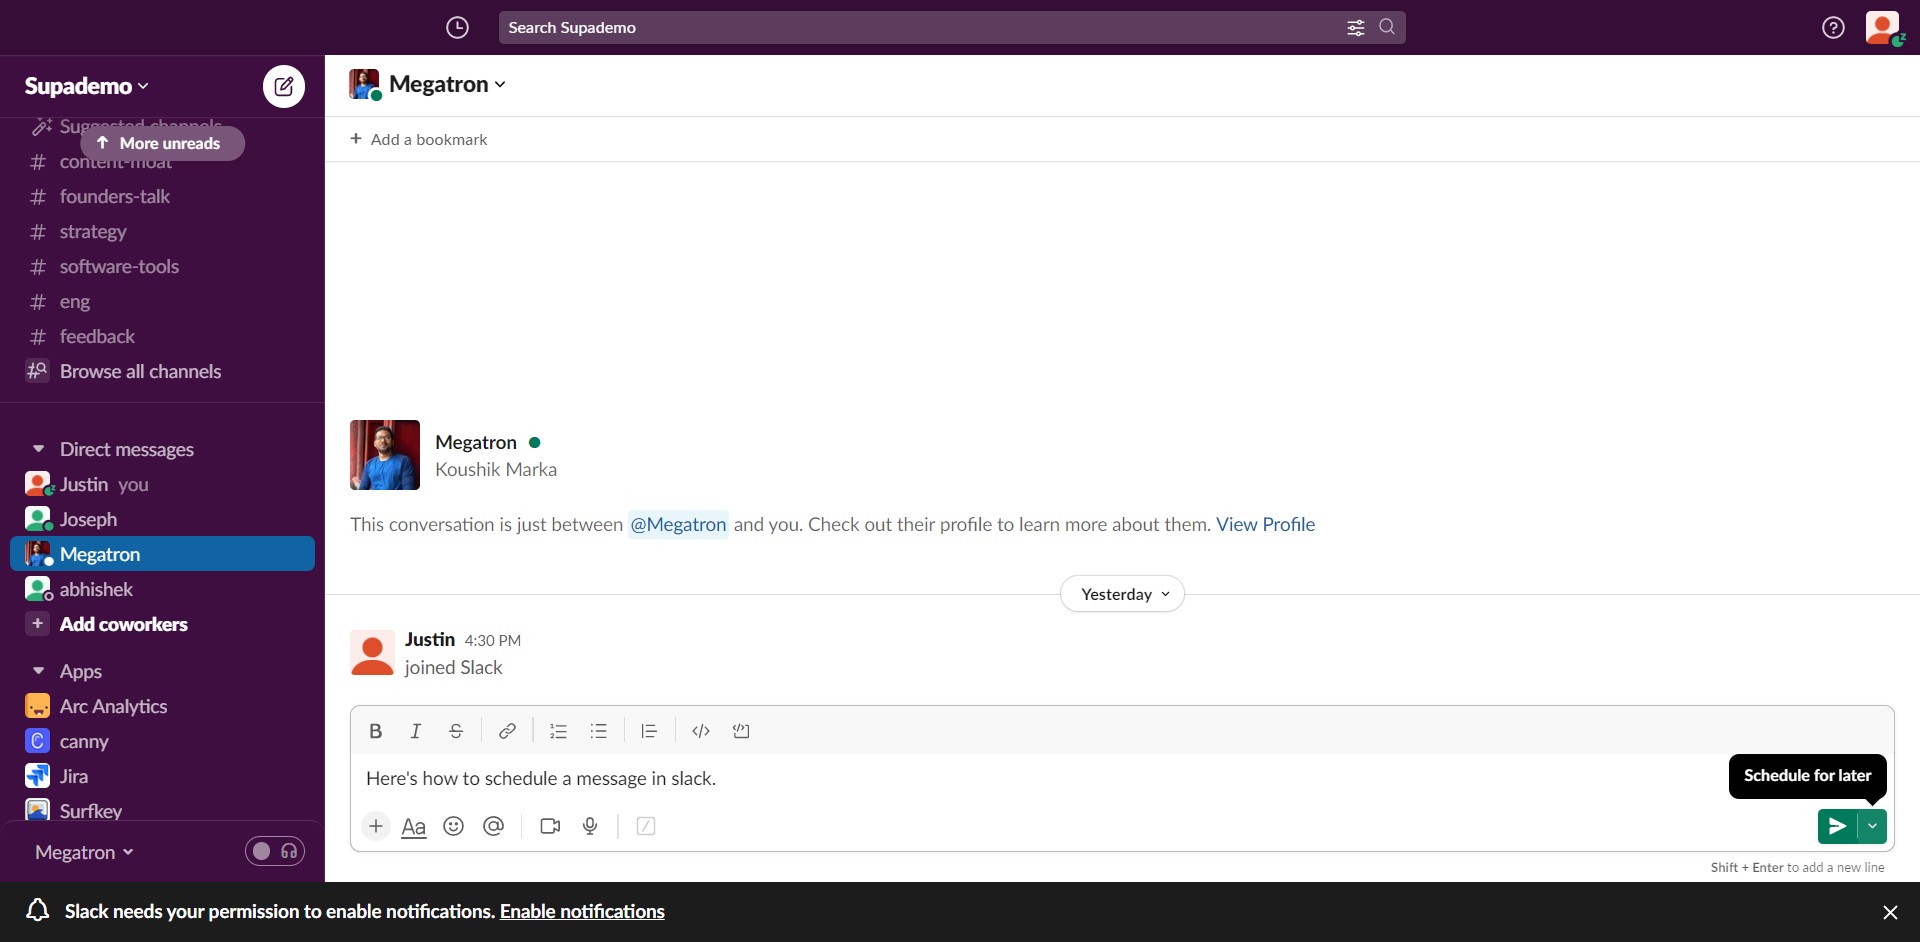 How to schedule a message in Slack